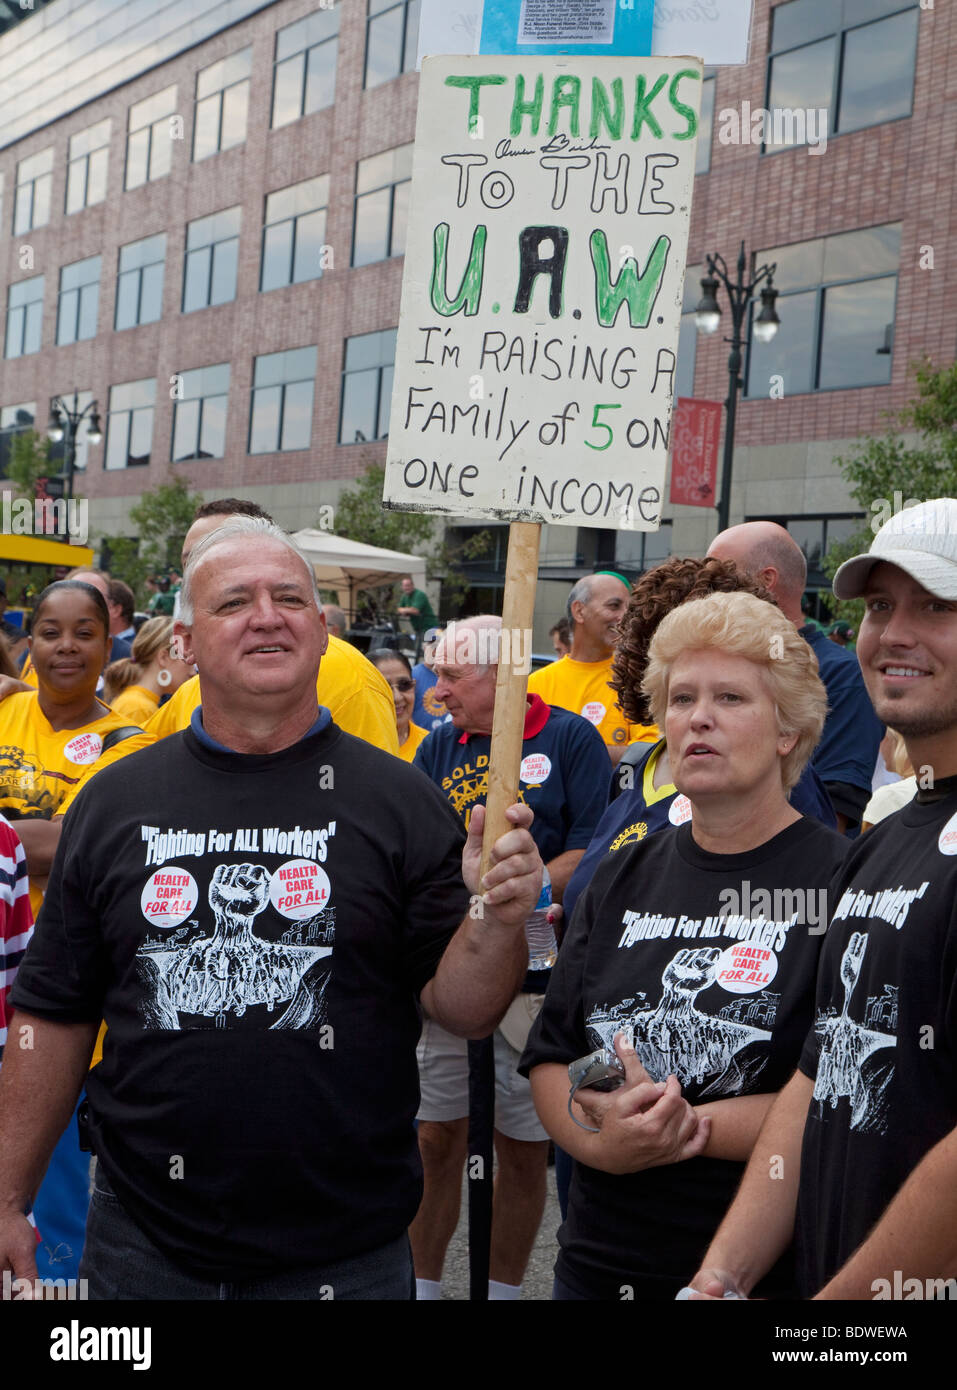 Detroit, Michigan - A member of the United Auto Workers with his family at the Labor Day parade. Stock Photo